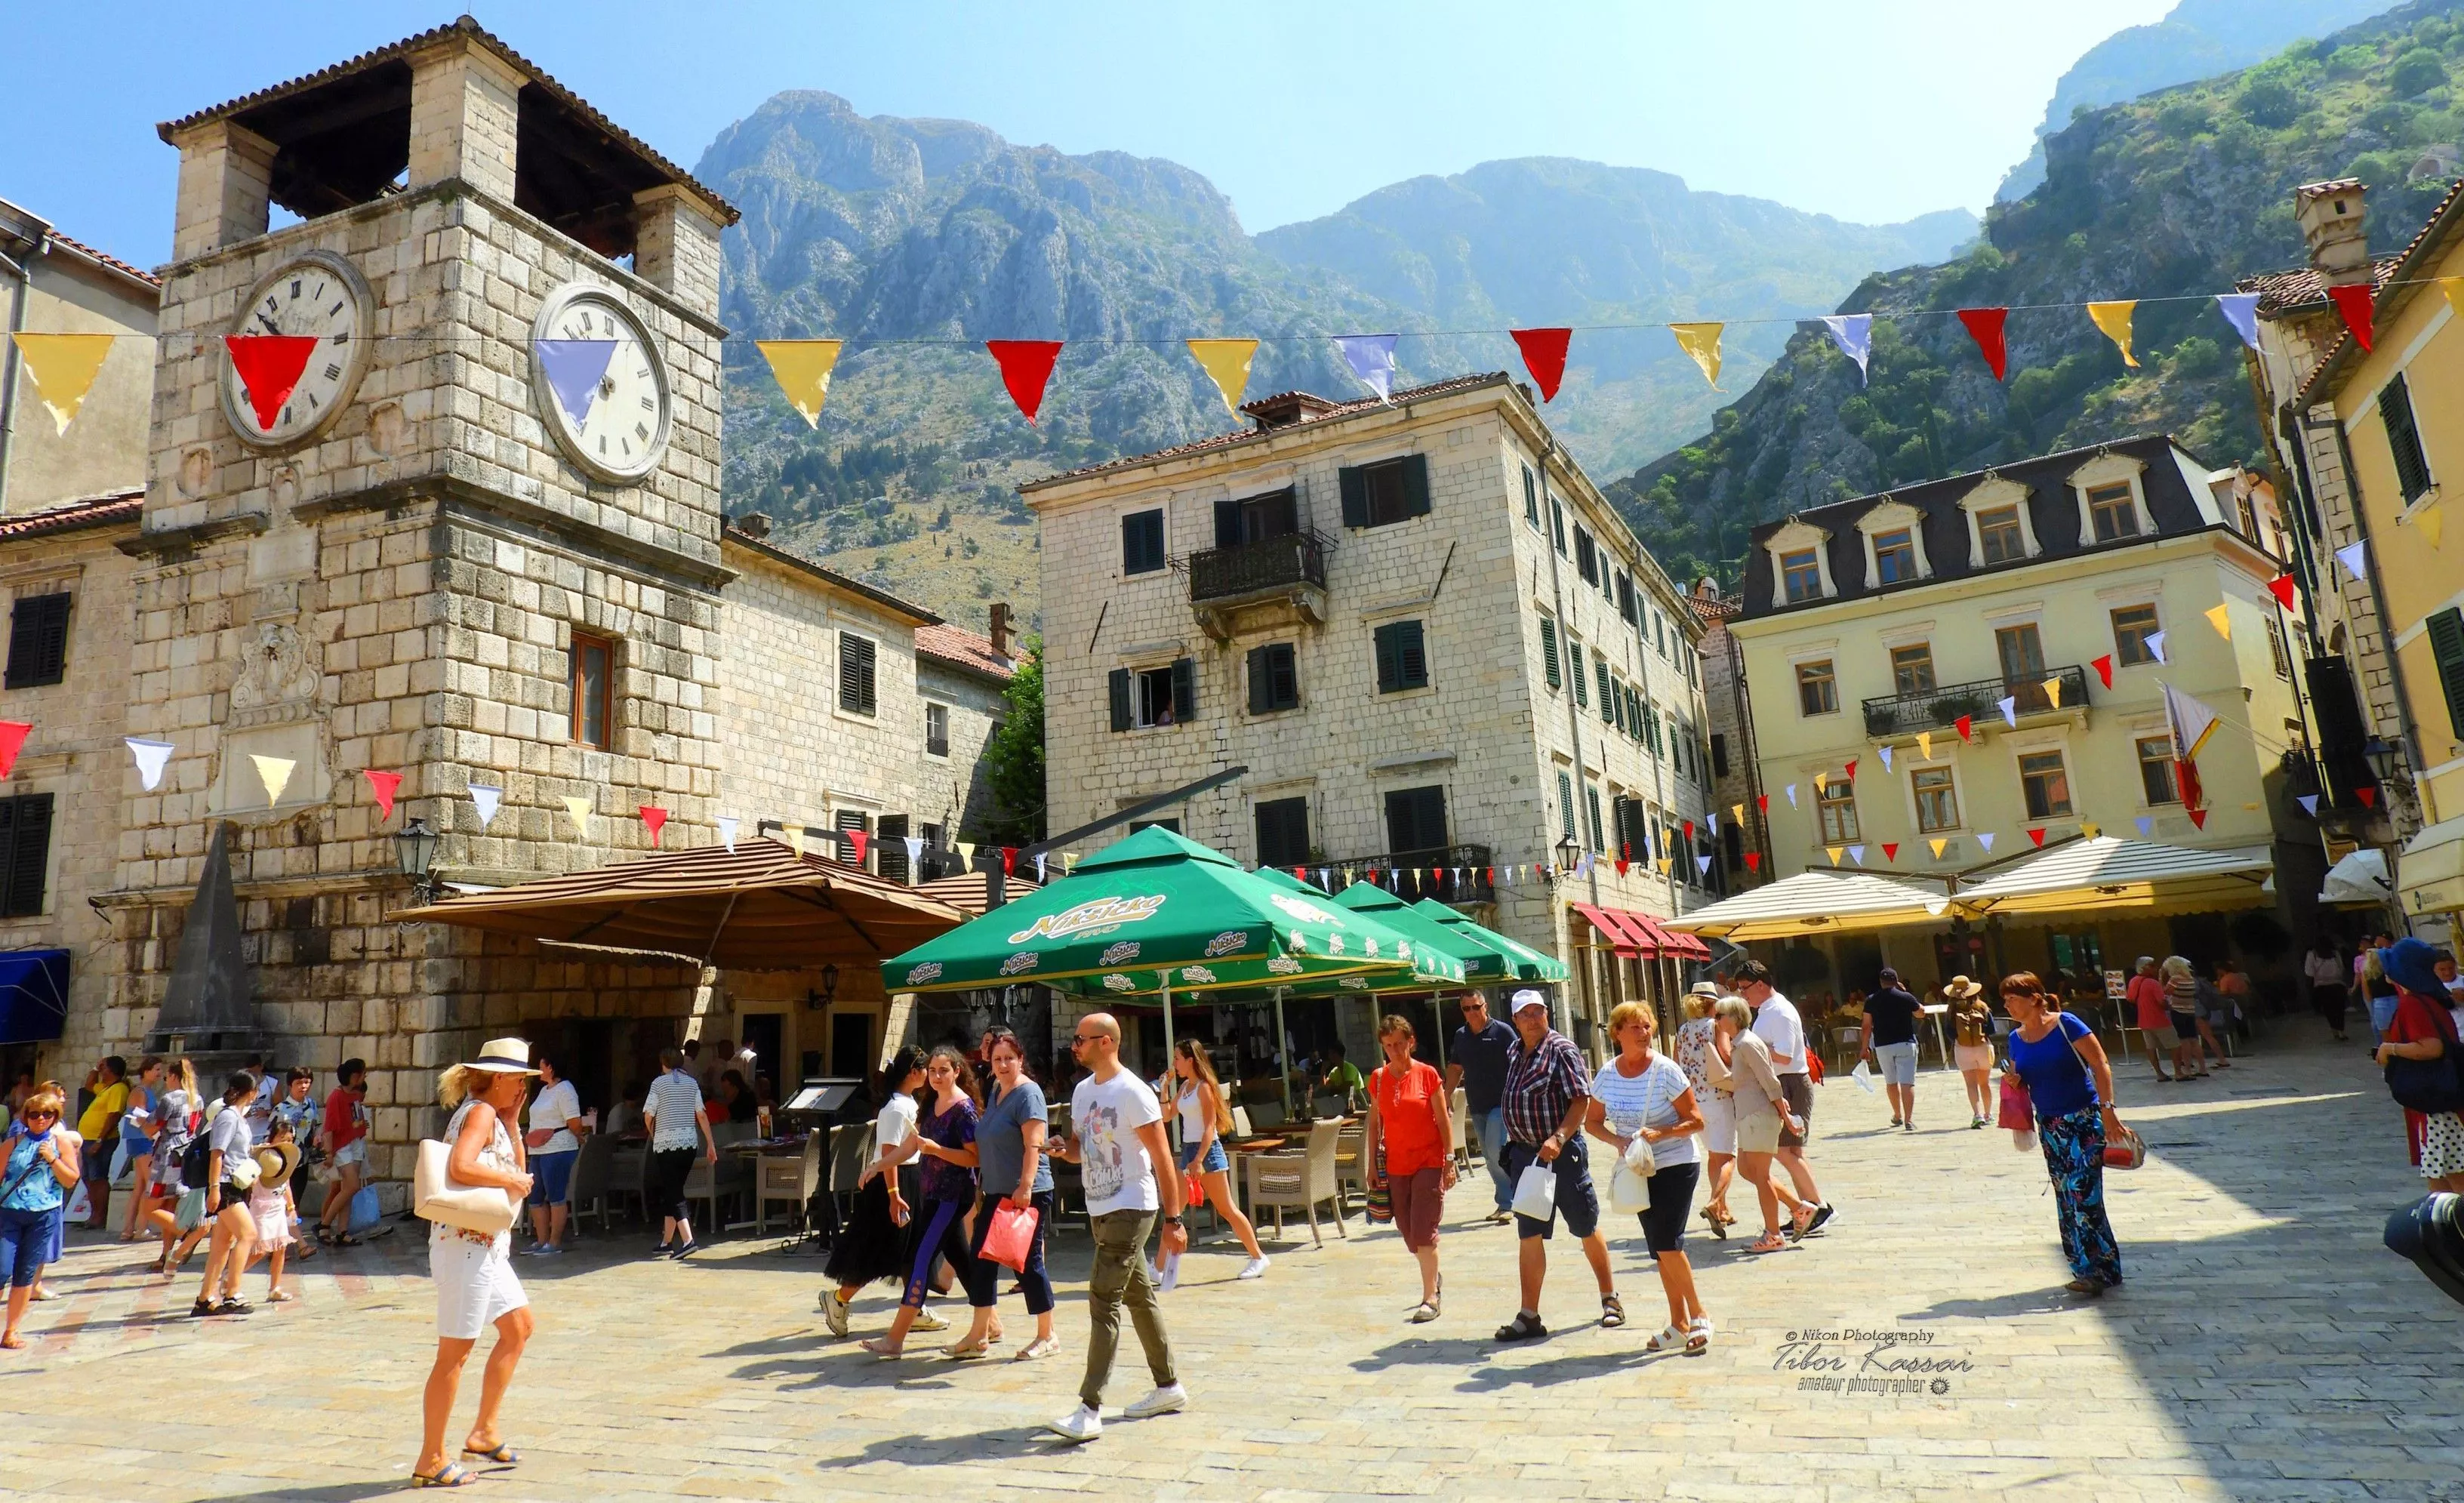 Kotor Old Town in Montenegro, Europe | Architecture - Rated 3.9